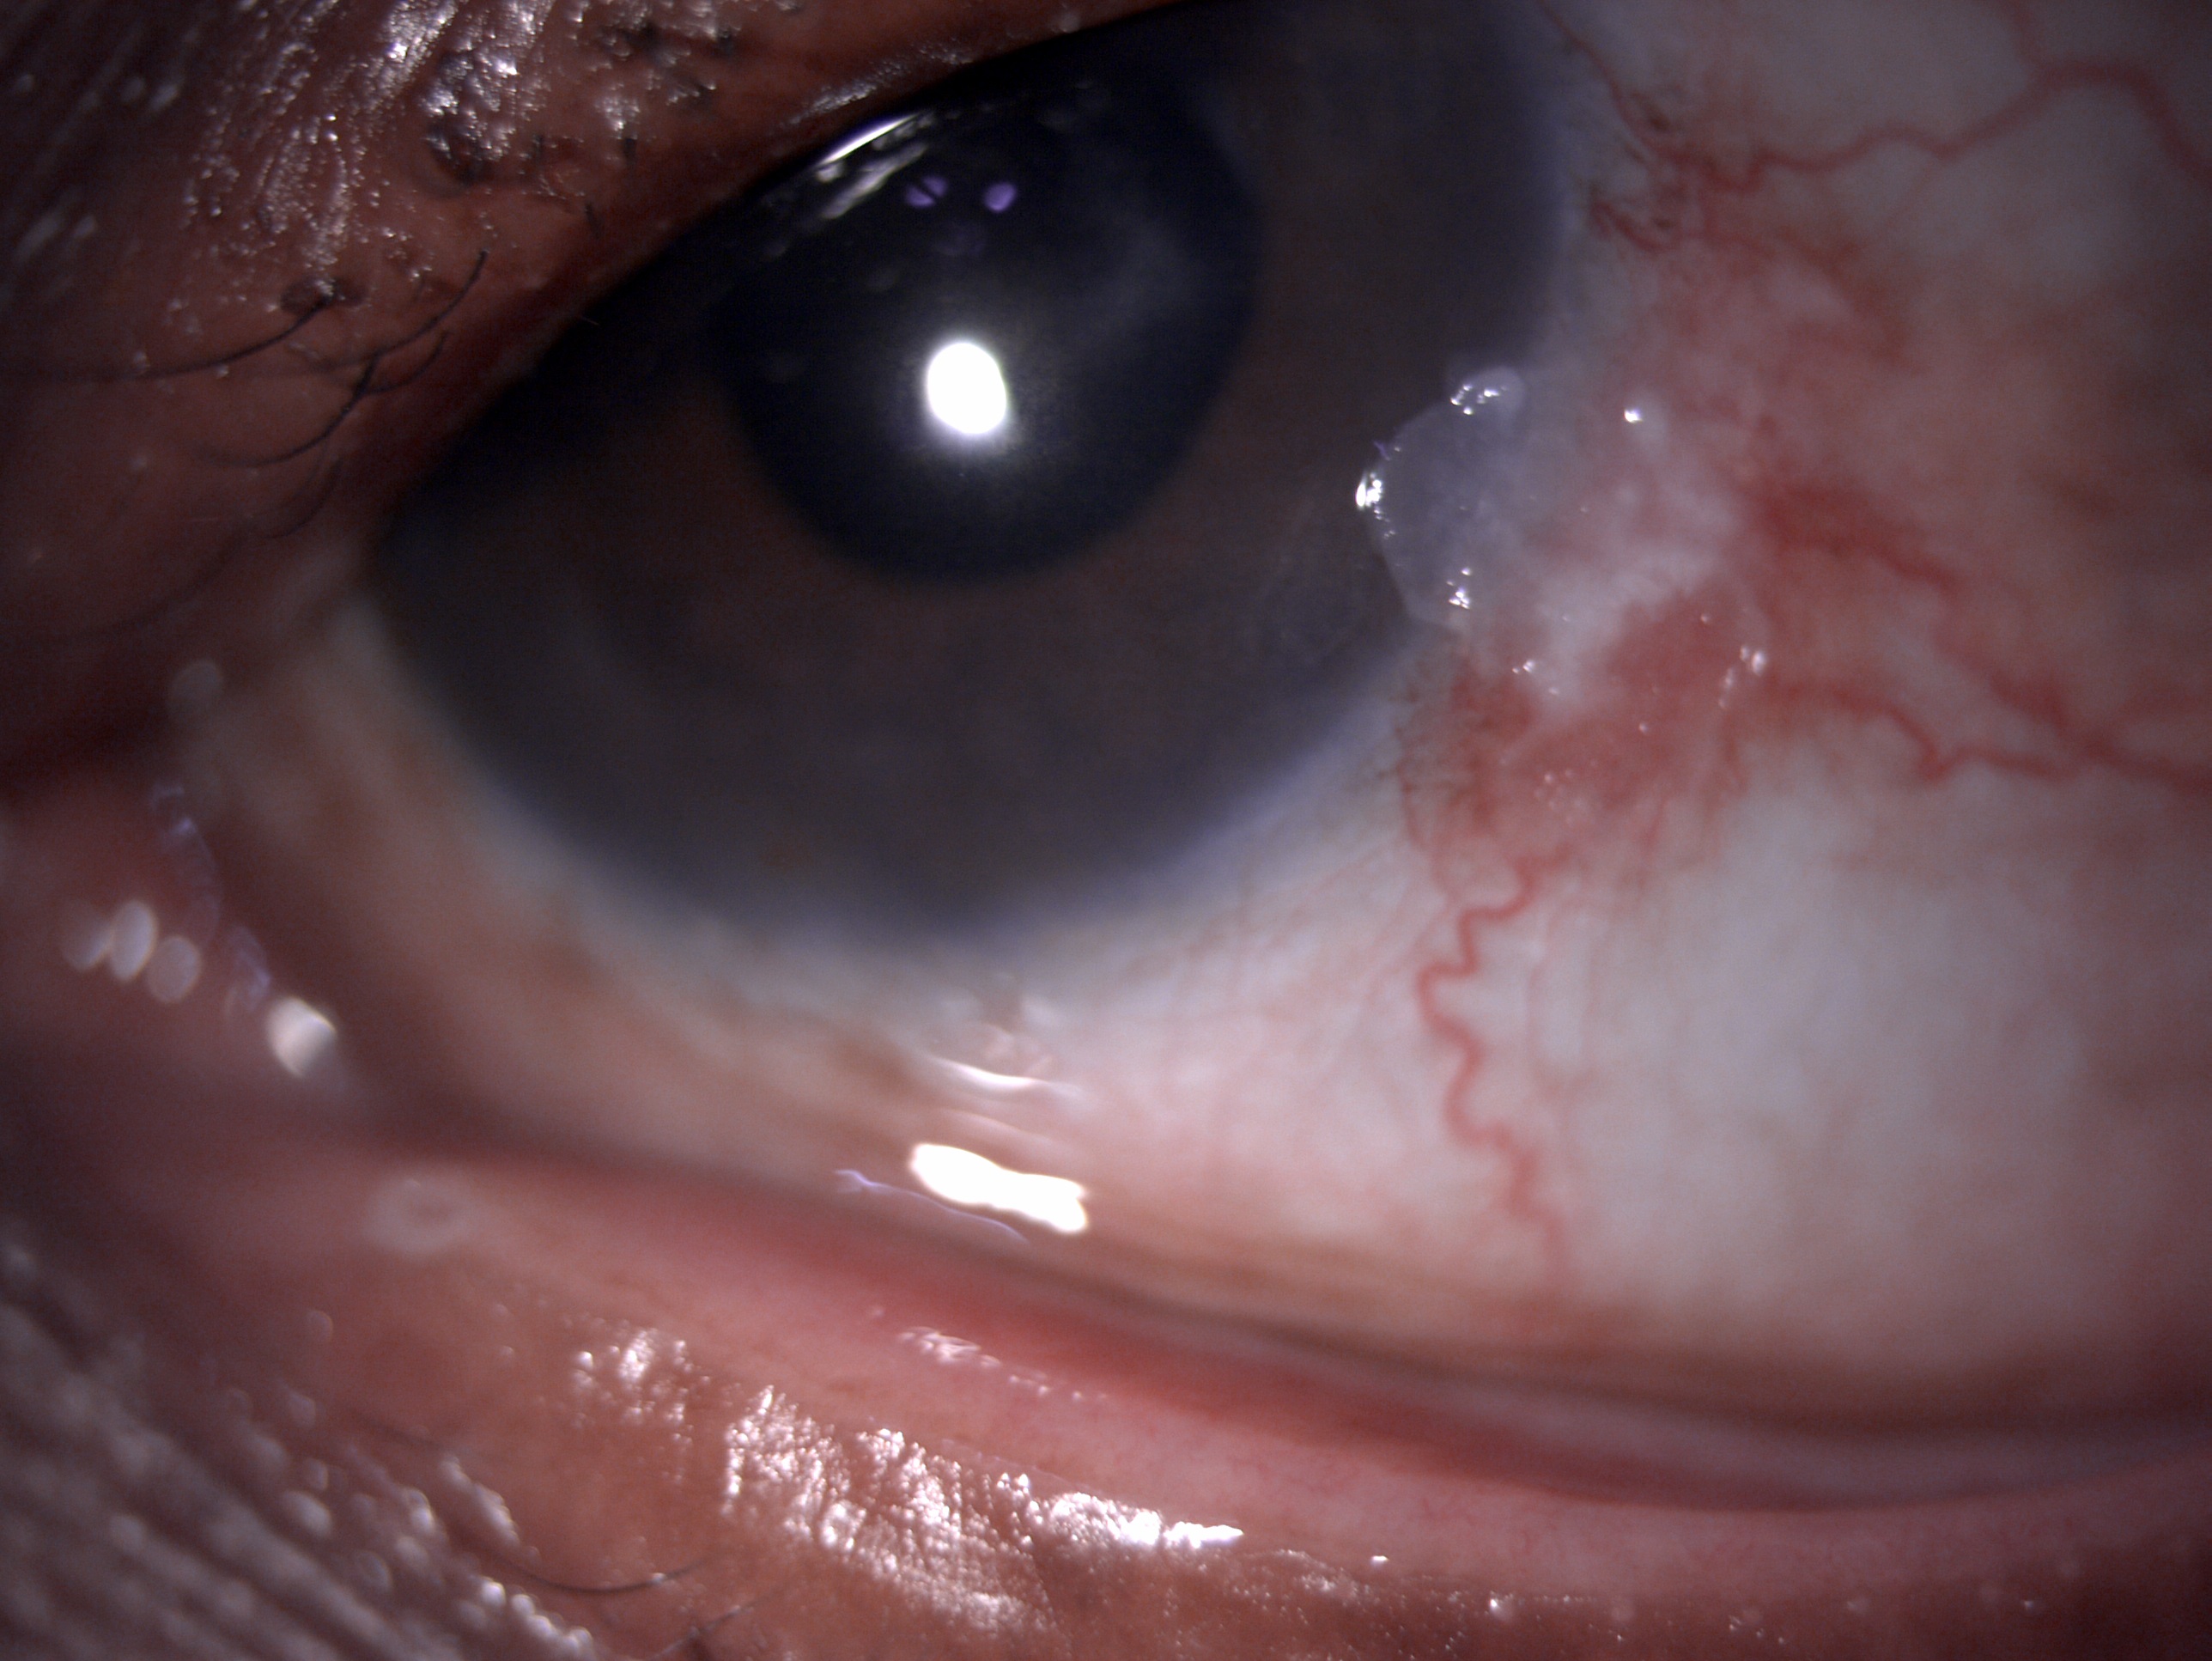 Slit lamp image of the patient depicting nasal whitish gelatinous conjunctivocorneal elevated plaque suggestive of ocular surface squamous neoplasia